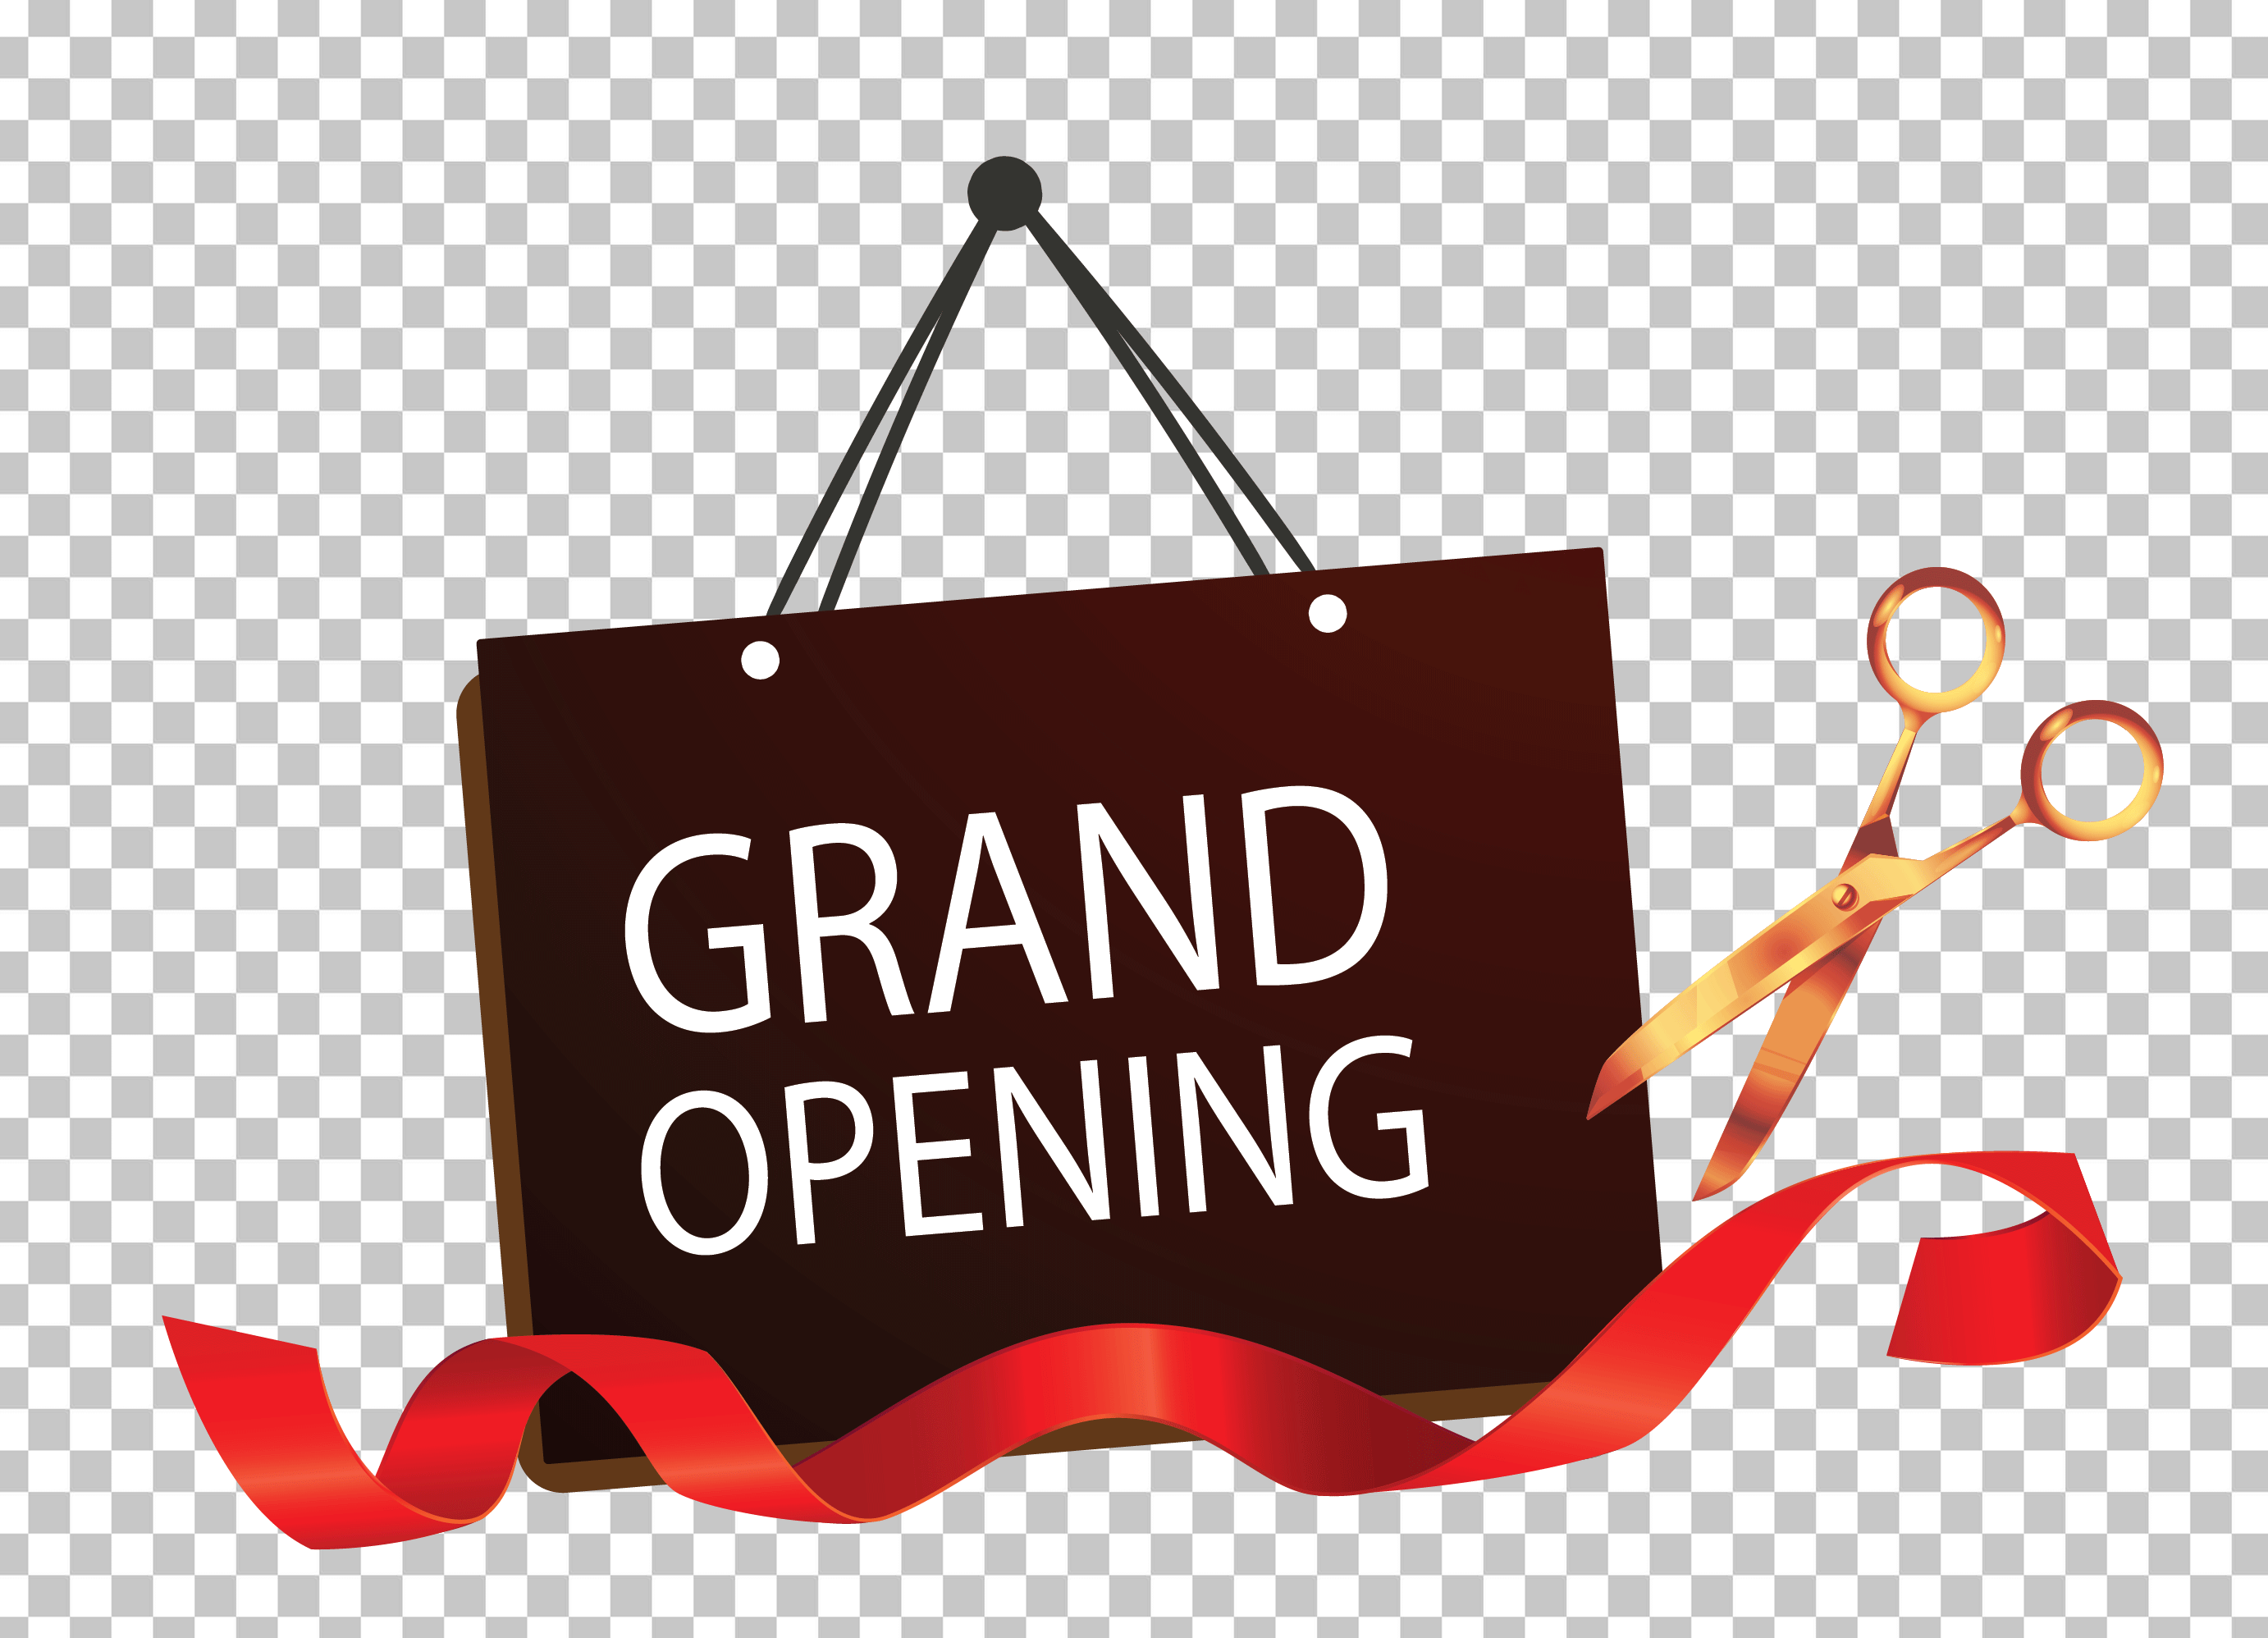 A grand opening sign with a red ribbon and scissors on a transparent background.